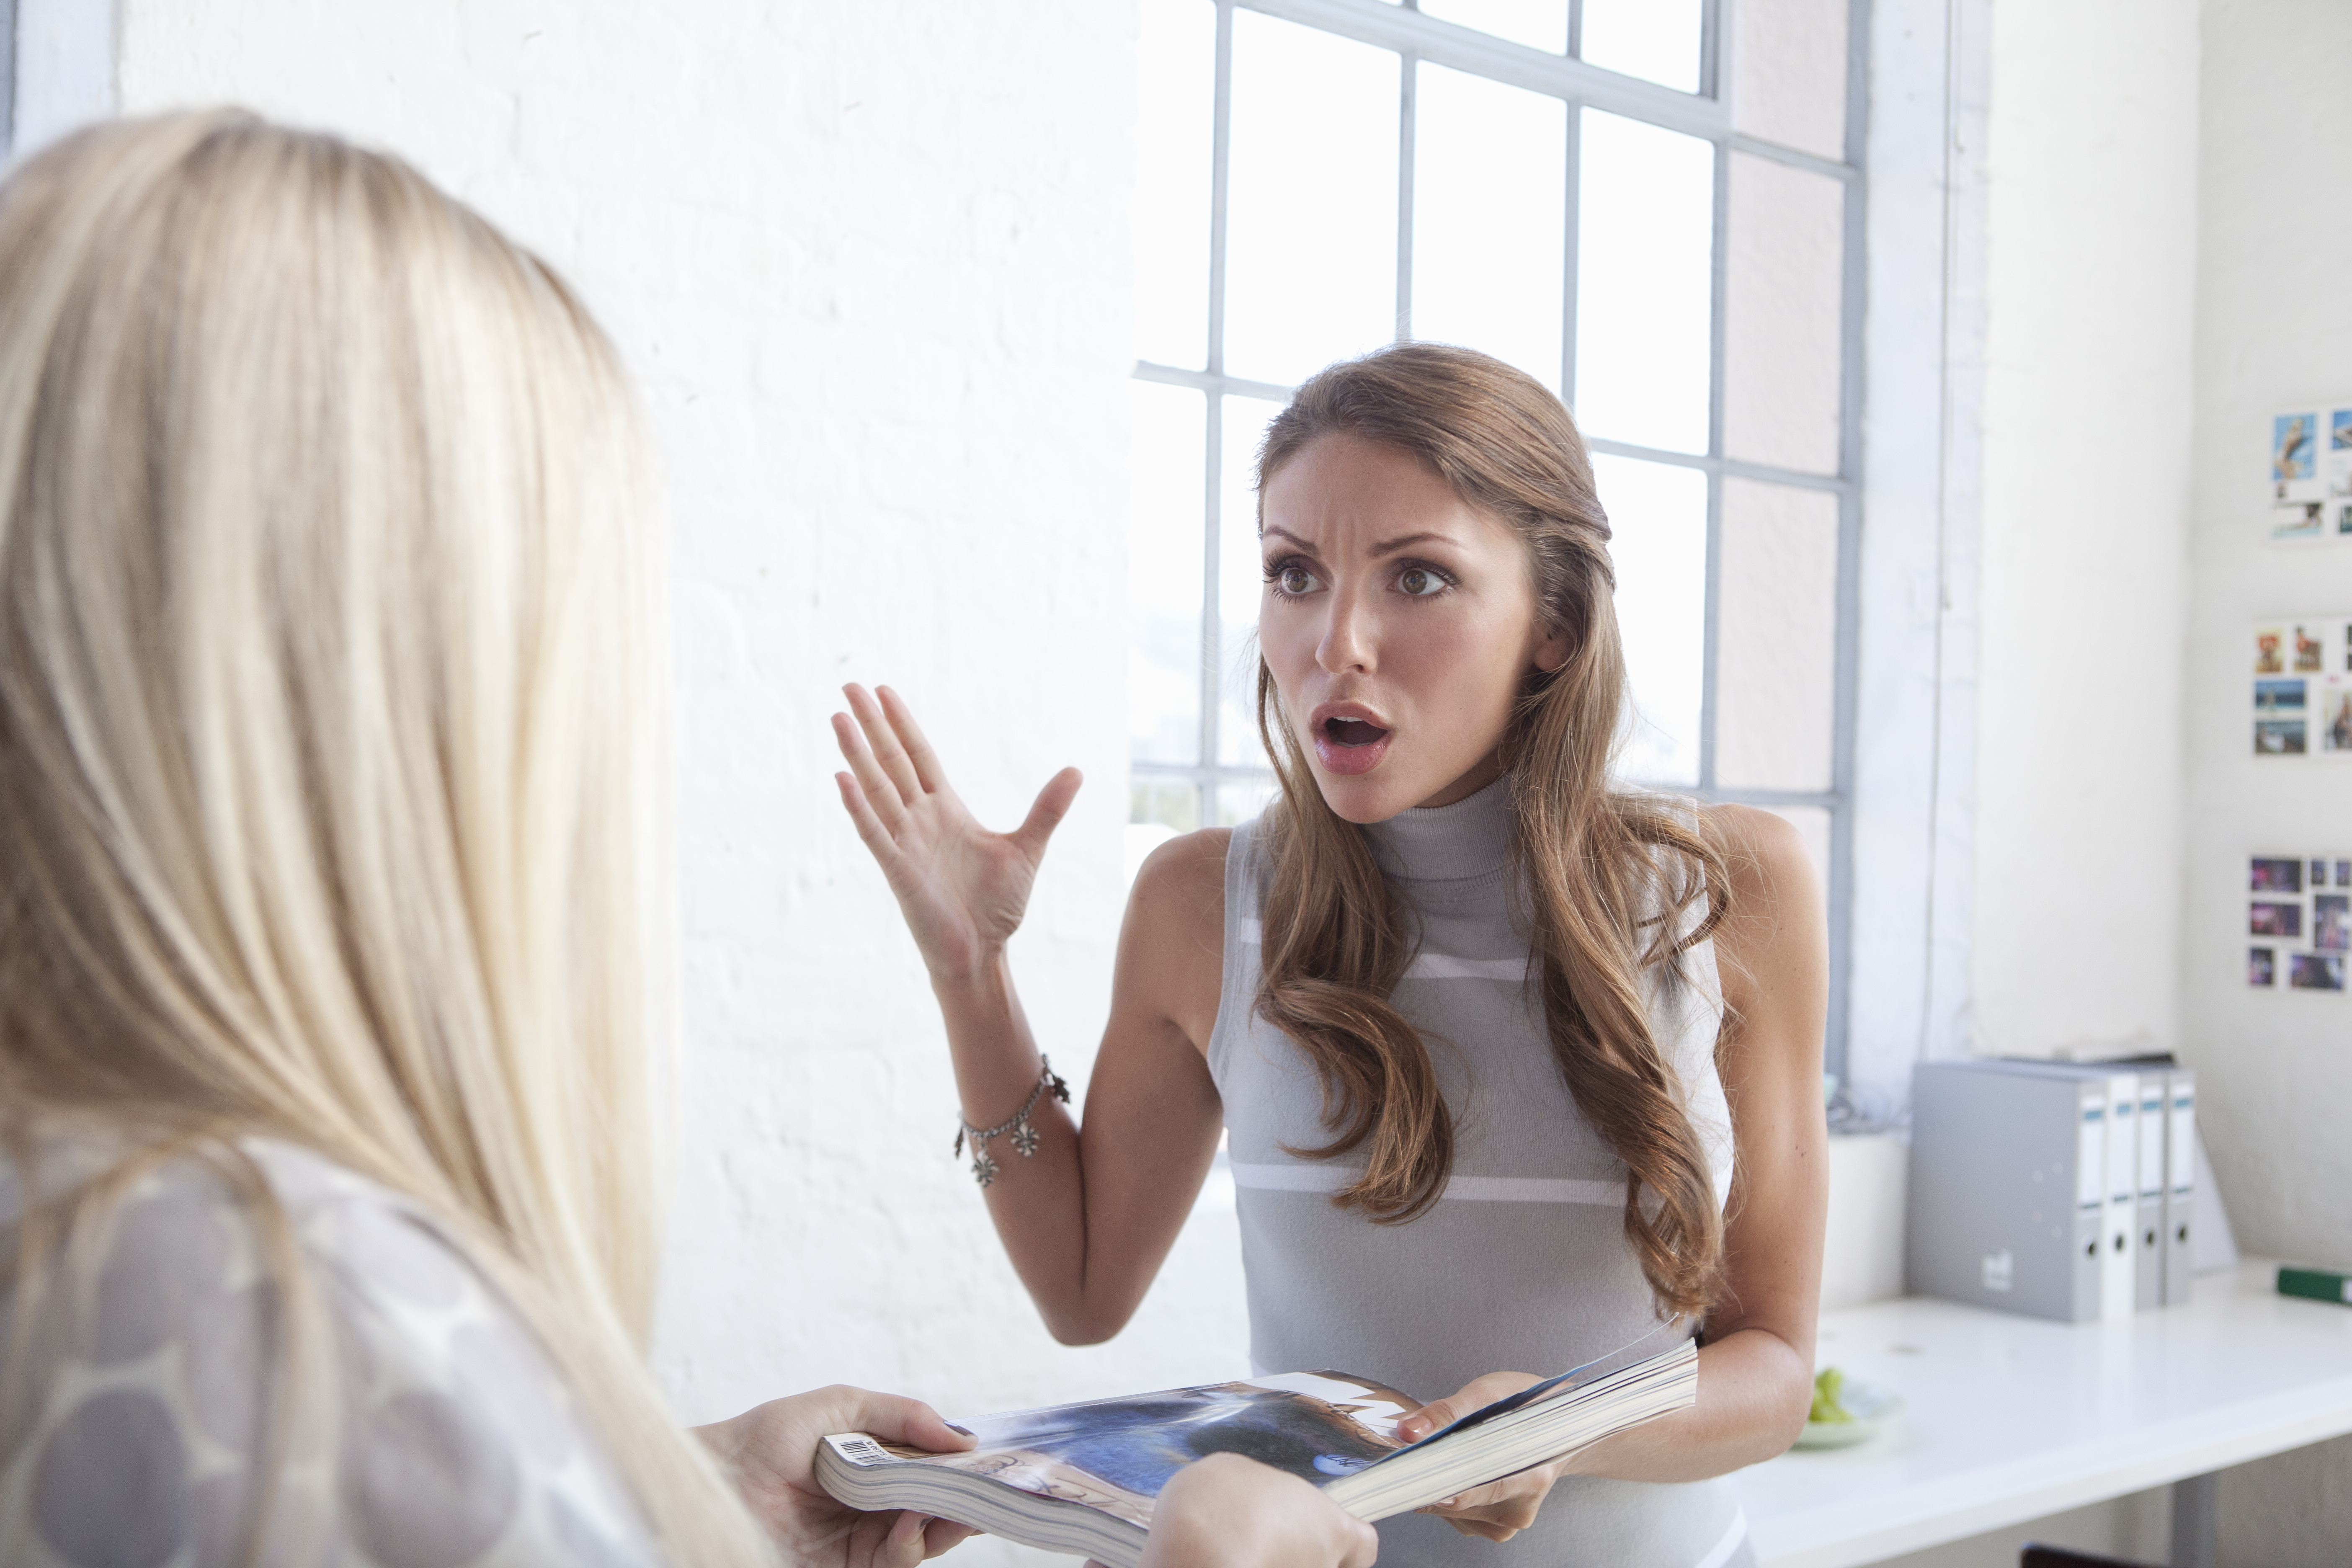 A woman is shocked while talking to another woman | Getty Images